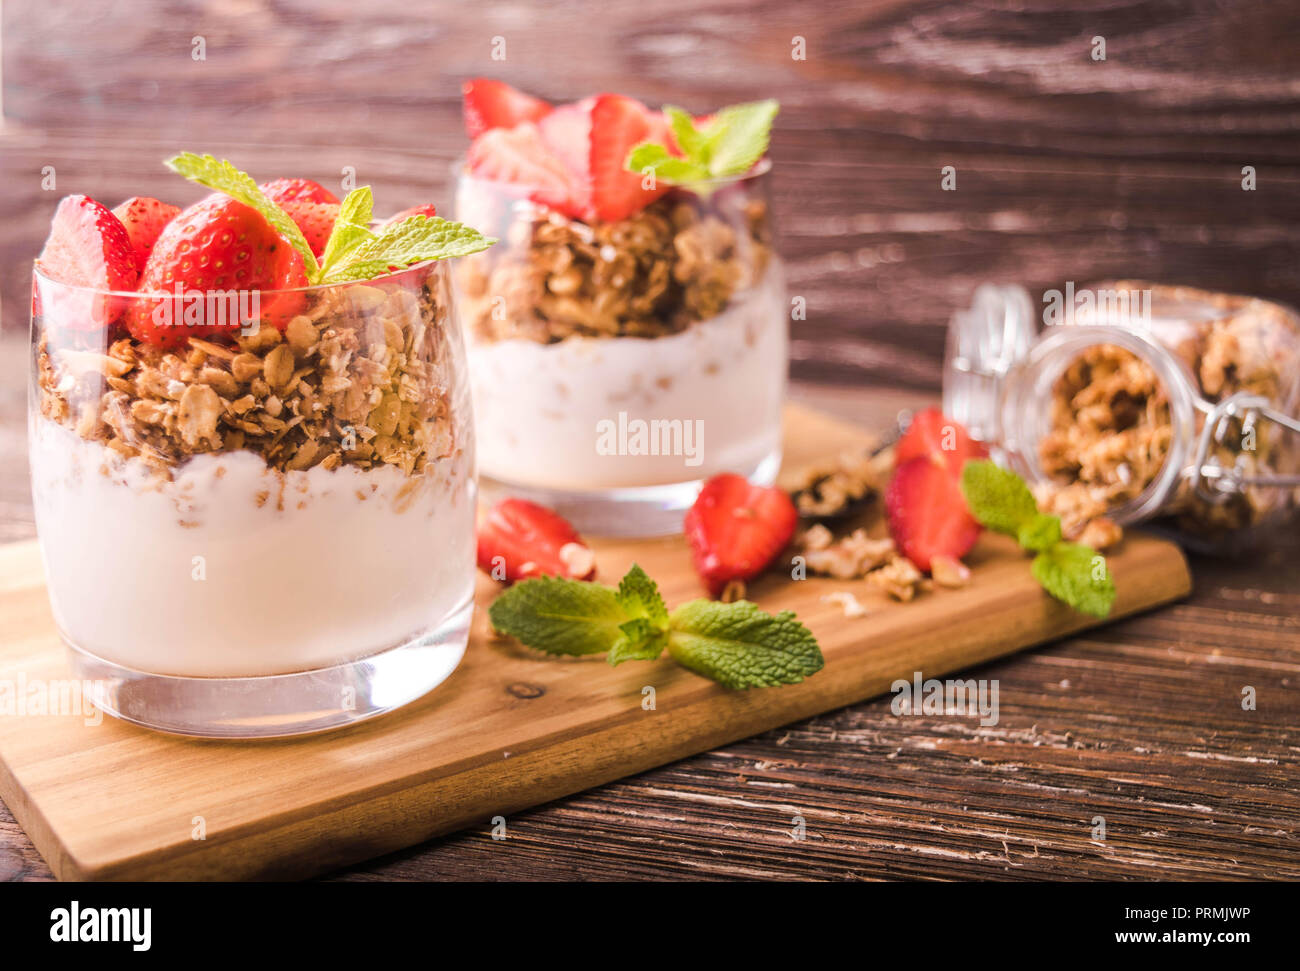 Yogurt parfait in glasses with granola, strawberries and mint leaves. On wooden board. Healthy breakfast concept. Rustic wooden table background. Stock Photo